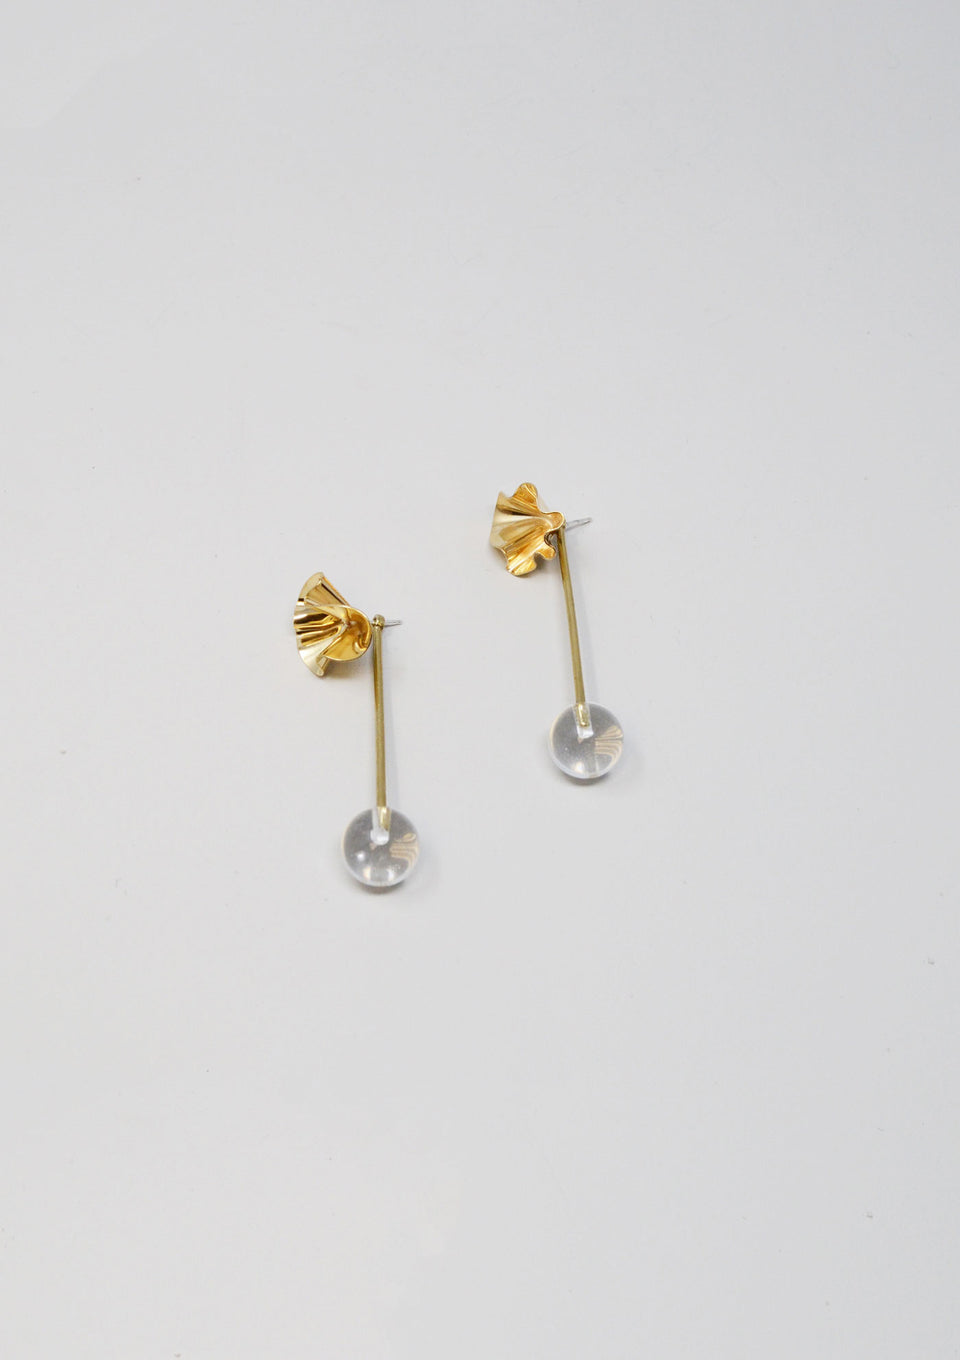 Cuarzo Earrings - ANTHER a shop